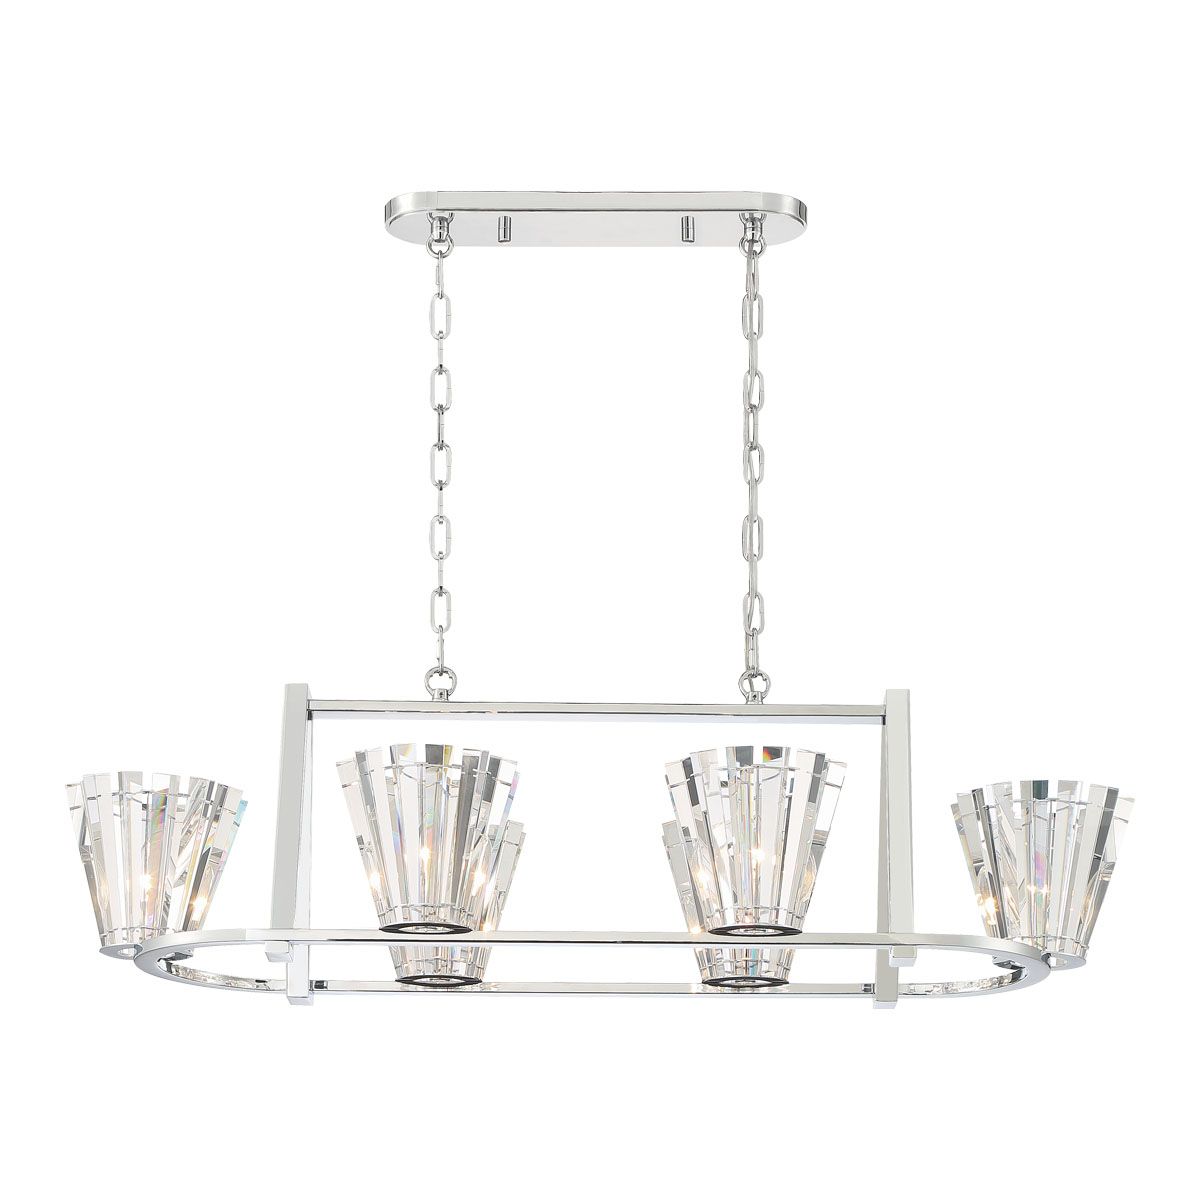 Ricca 45 in. 6 Lights Chandelier Silver finish